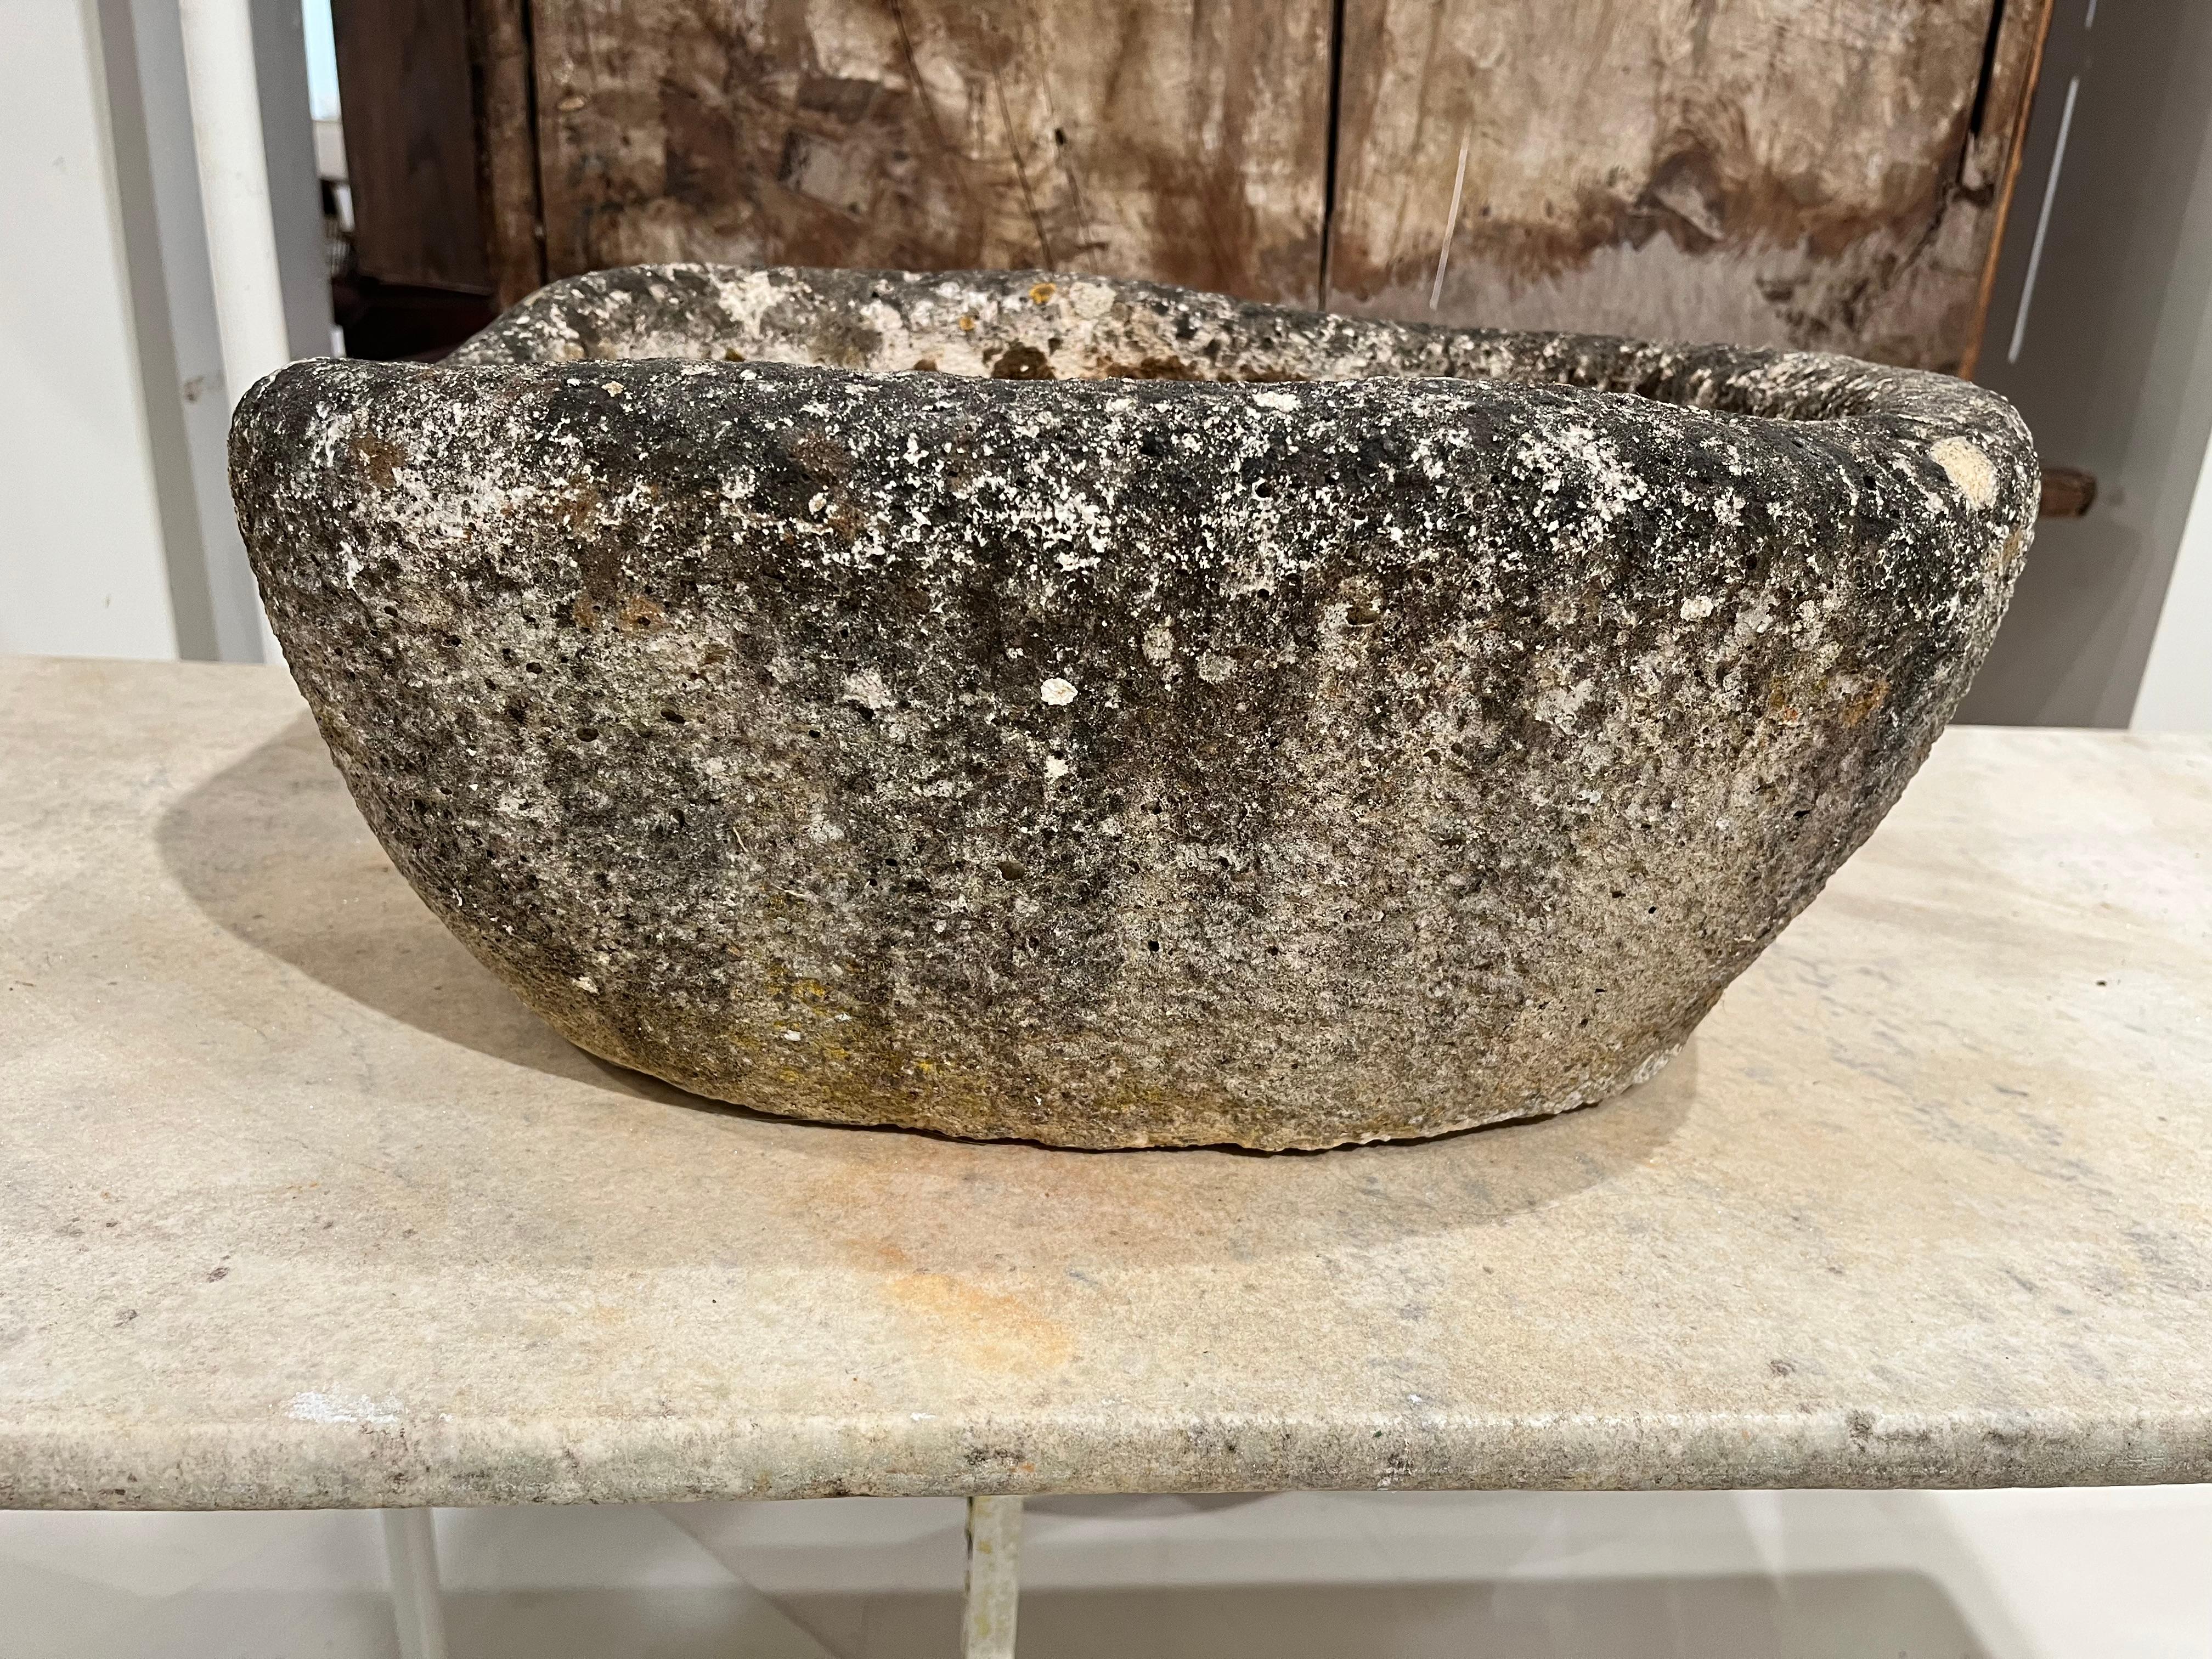 18th century stone sink with excellent patina. Perfect for a garden or a backyard.